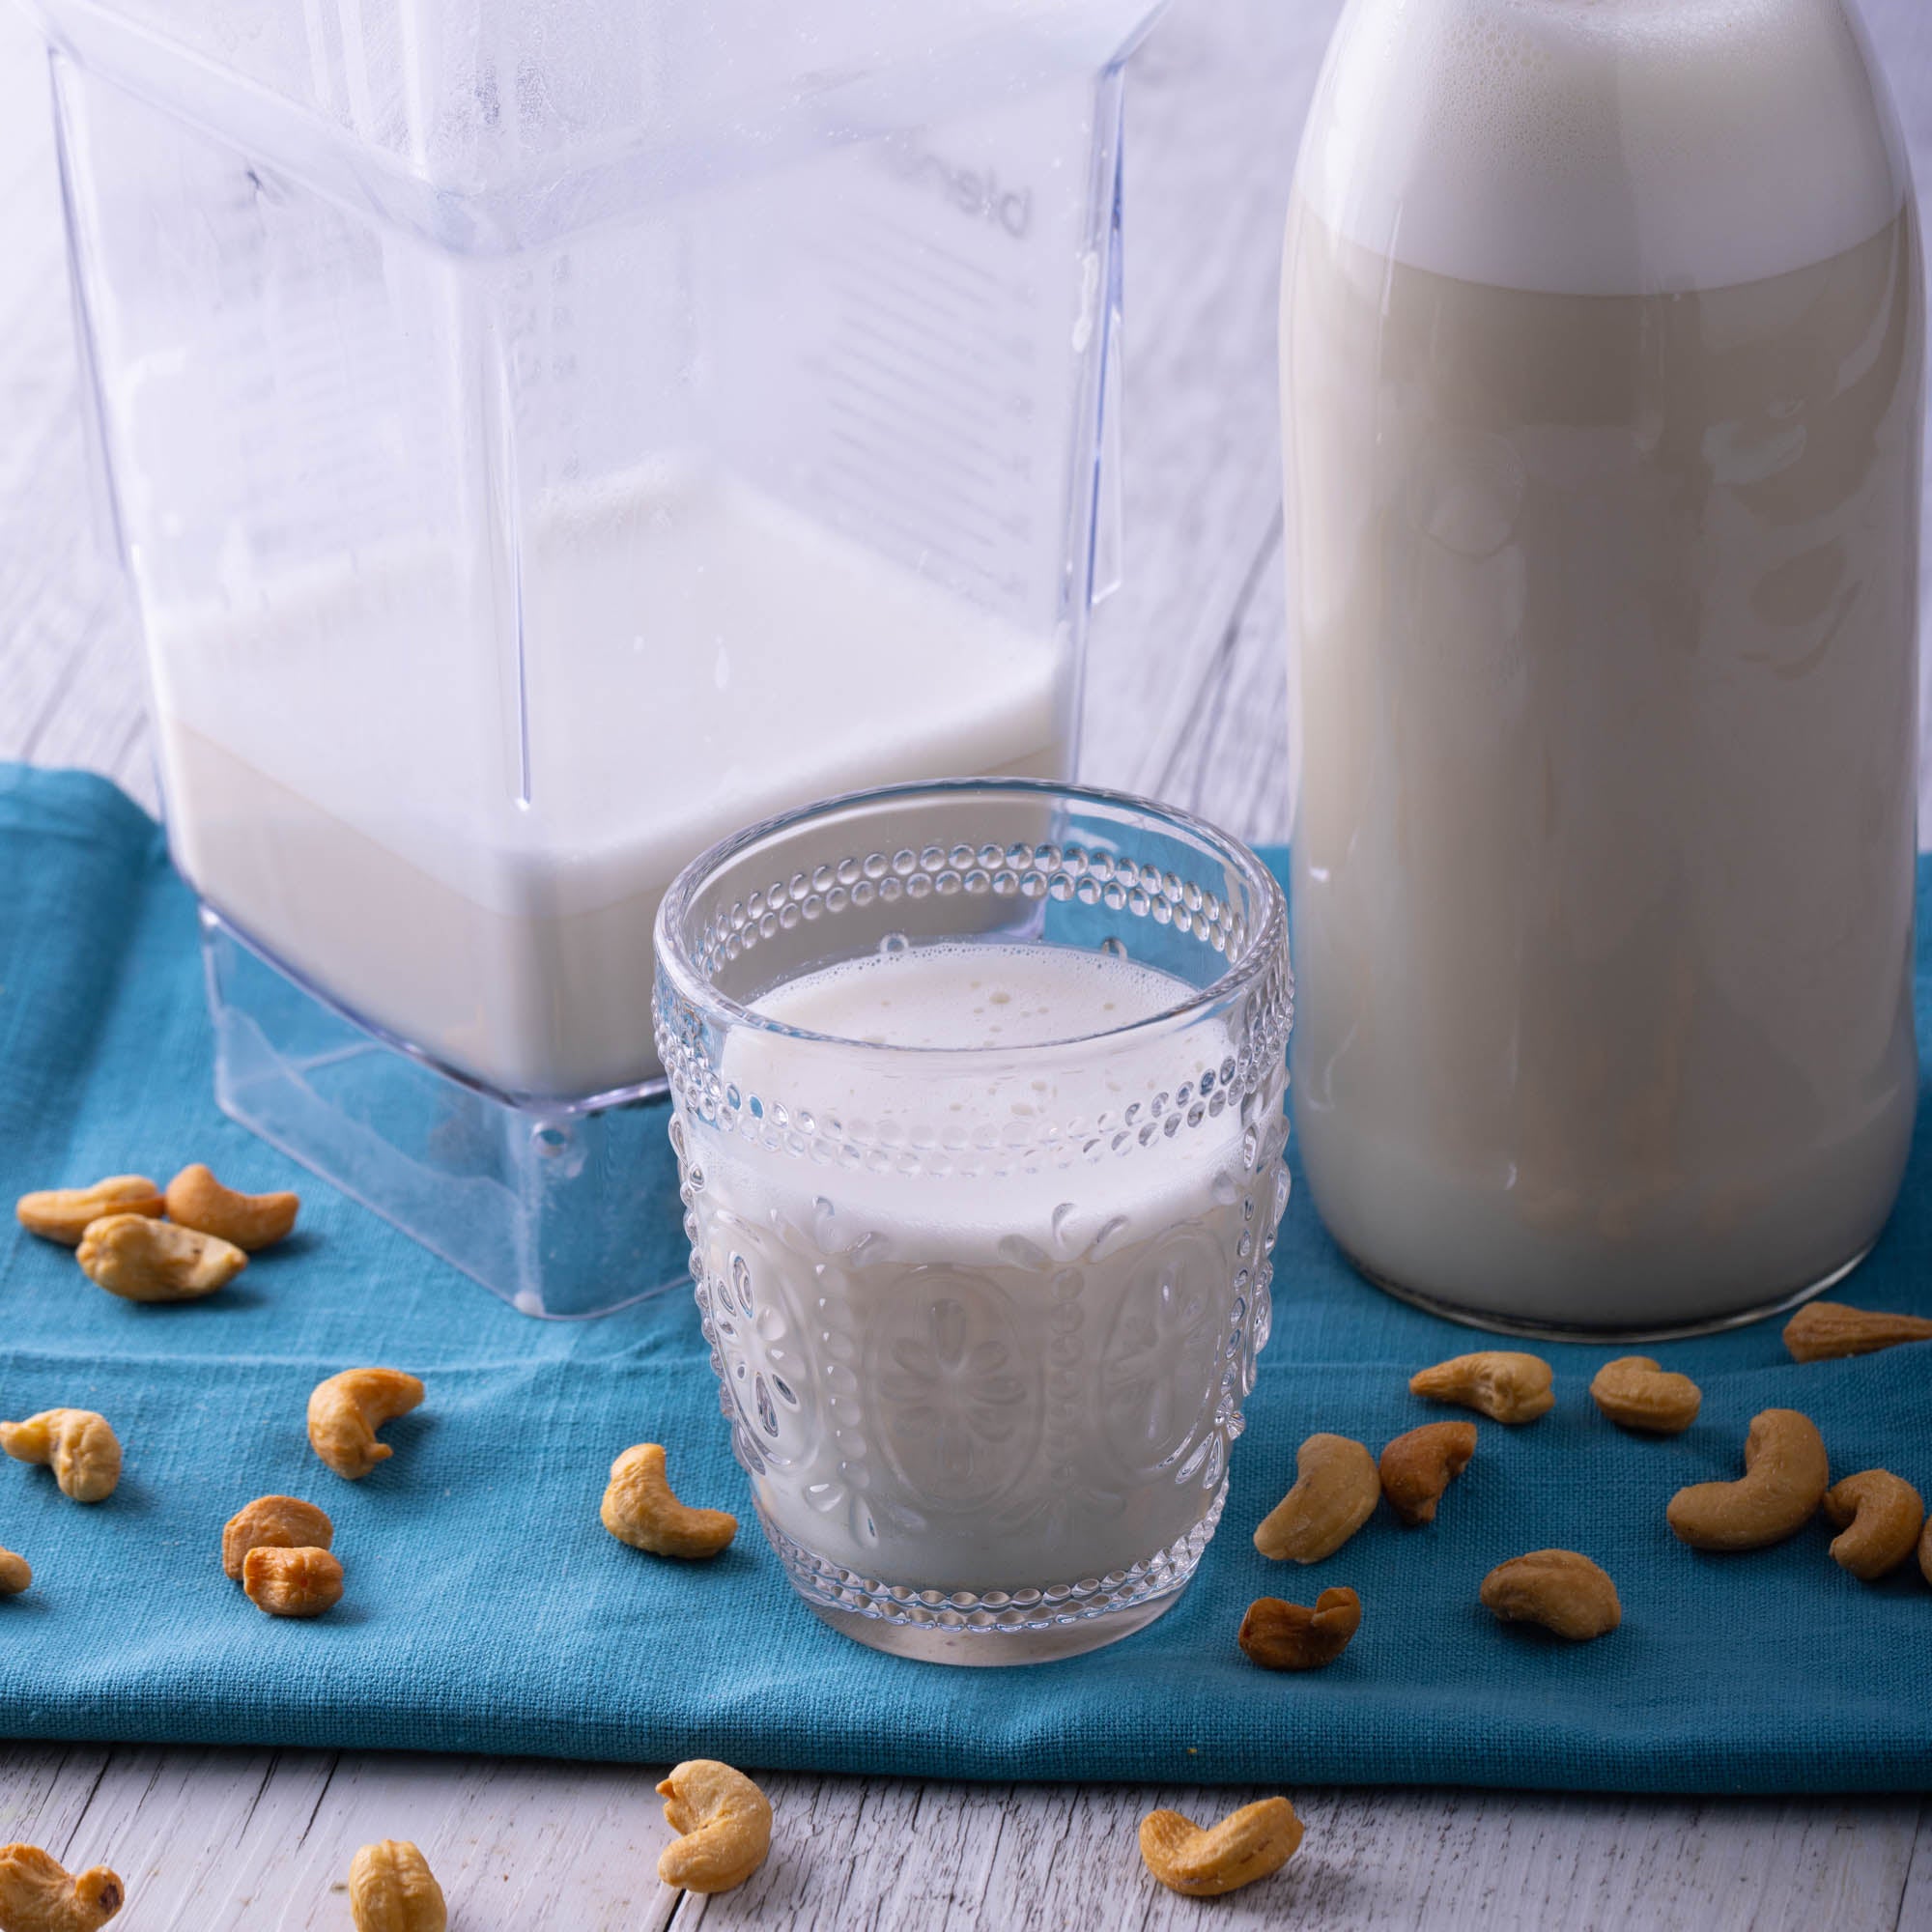 Save over $1,000 per year by making your own cashew milk. Simply blend 2 tablespoons cashew butter + 1 litre of water + pinch of salt. It will cost you under $1 per litre!